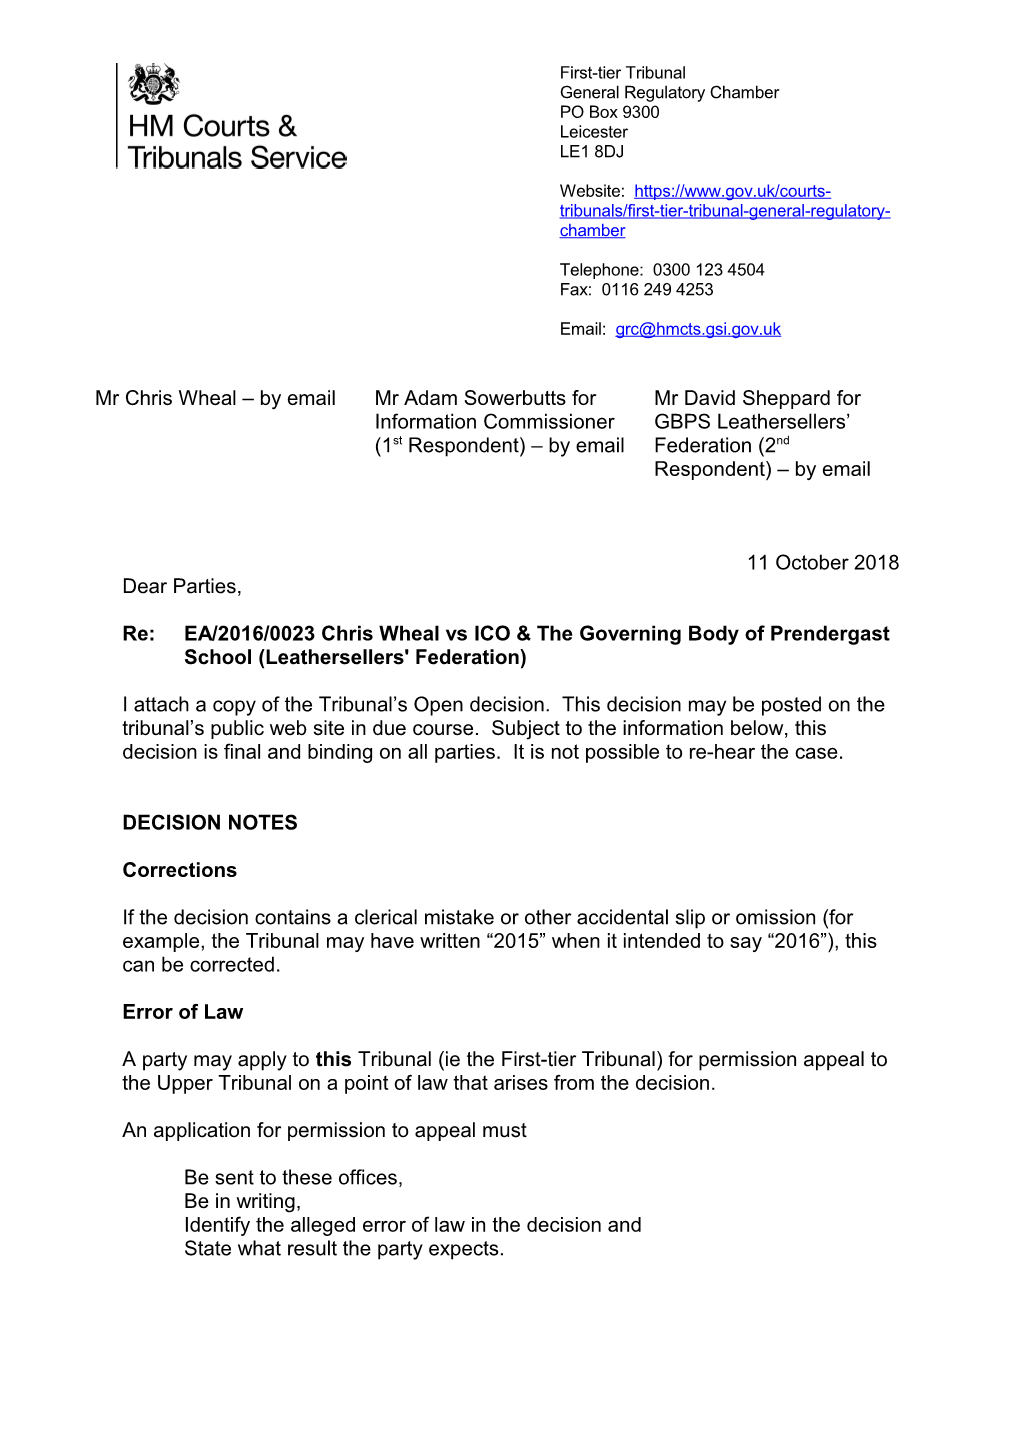 Re:EA/2016/0023 Chris Wheal Vs ICO & the Governing Body of Prendergastschool (Leathersellers'